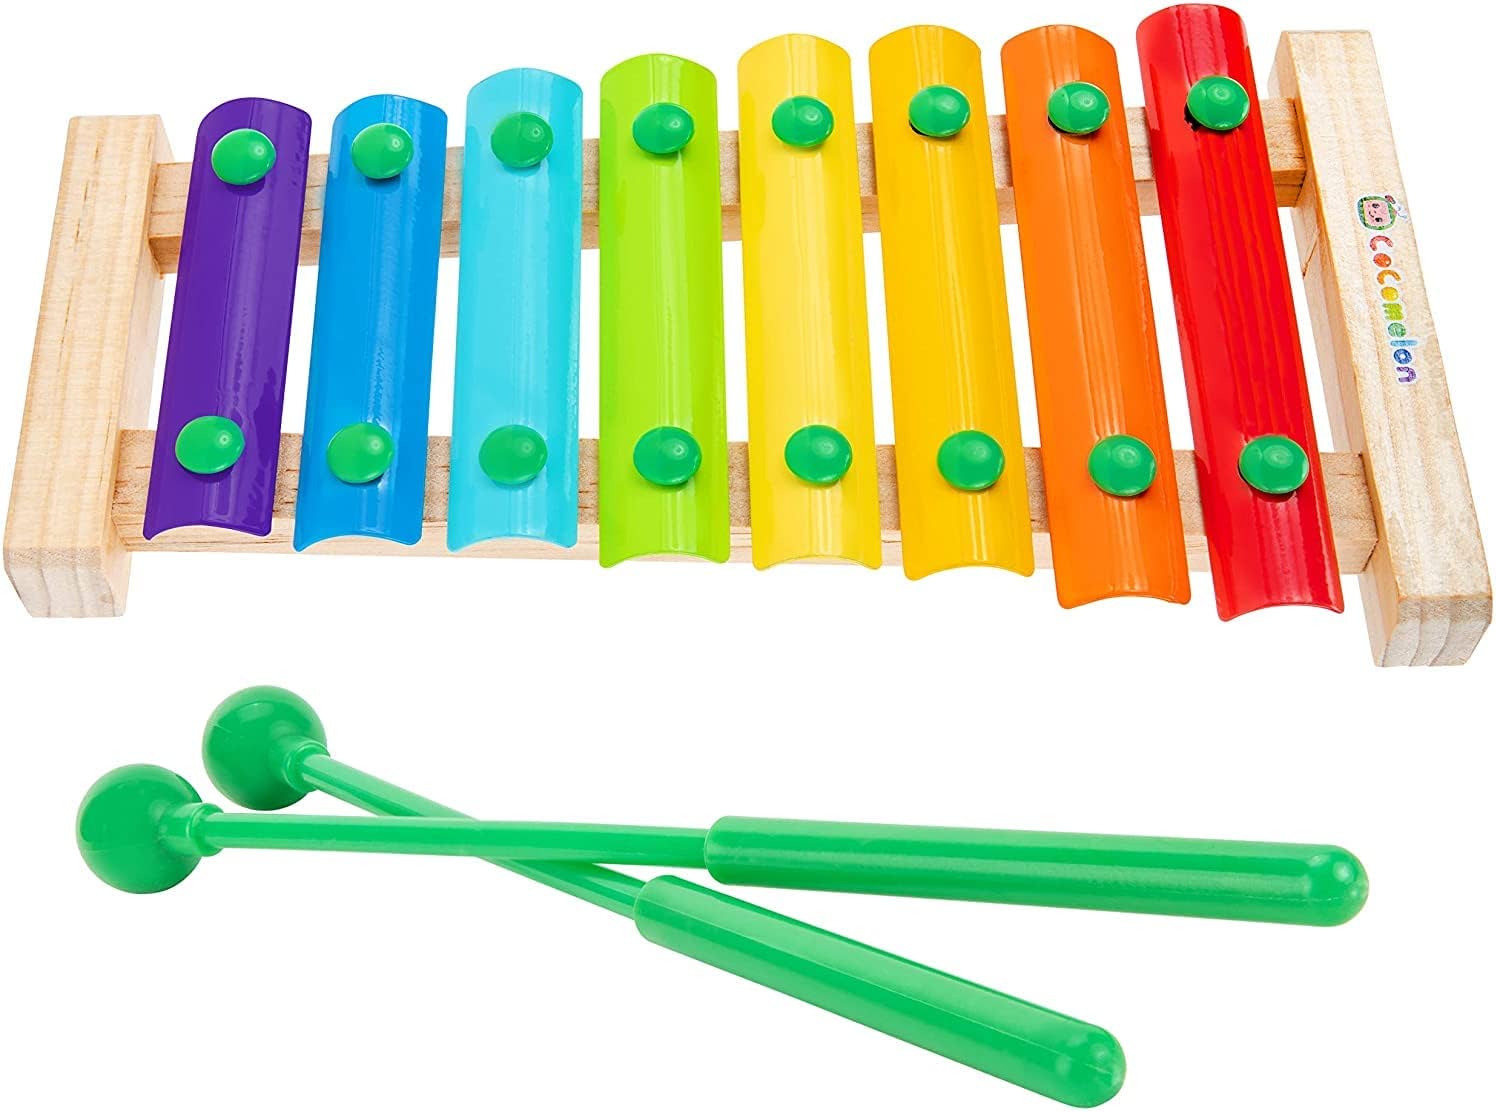 CoComelon First Act Musical Xylophone with 2 Mallets, Kids Music Toy, Develop Your Child’s Hand-Eye Coordination, Fine Motor Skills, and Gross Motor Skills